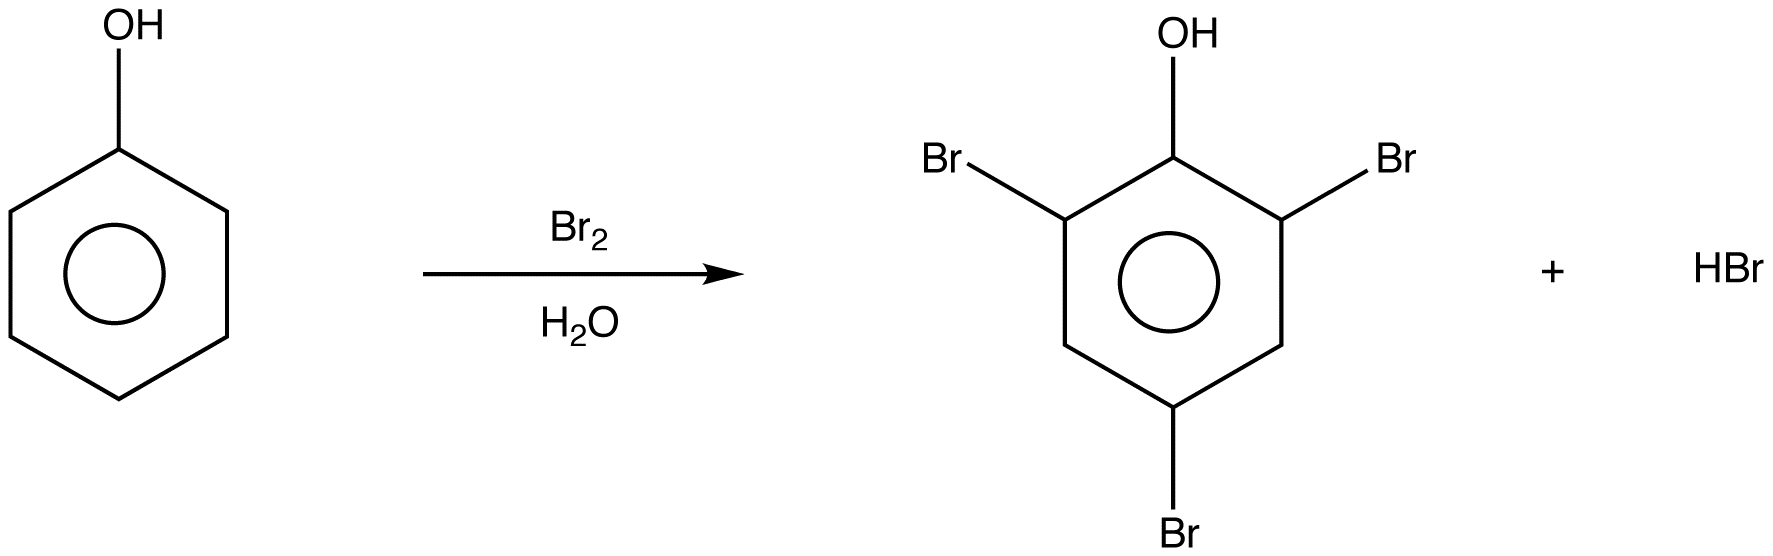 electrophilicaromaticsubstitution3.png